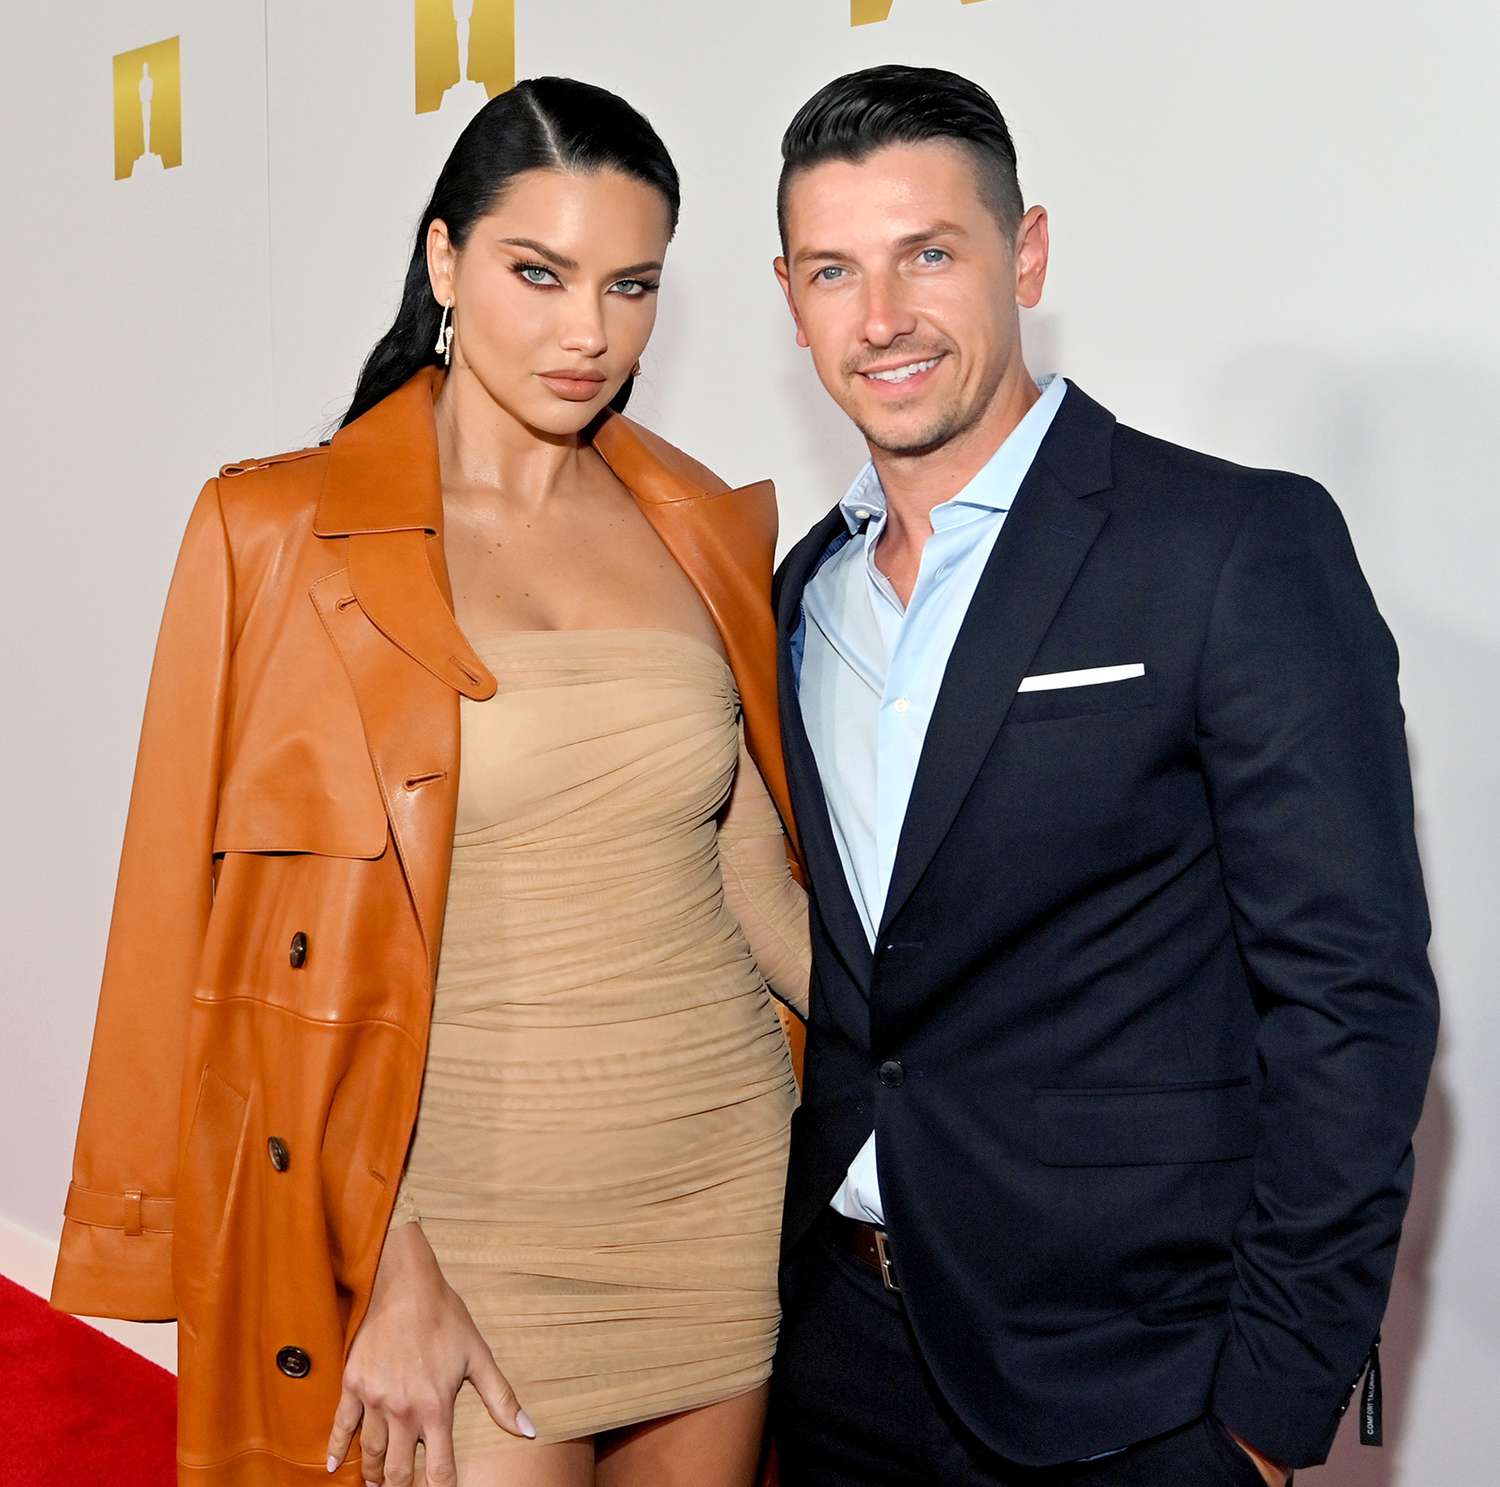 Adriana Lima and Andre L III attend the Academy Museum of Motion Pictures and Vanity Fair Premiere party at Academy Museum of Motion Pictures on September 29, 2021 in Los Angeles, California